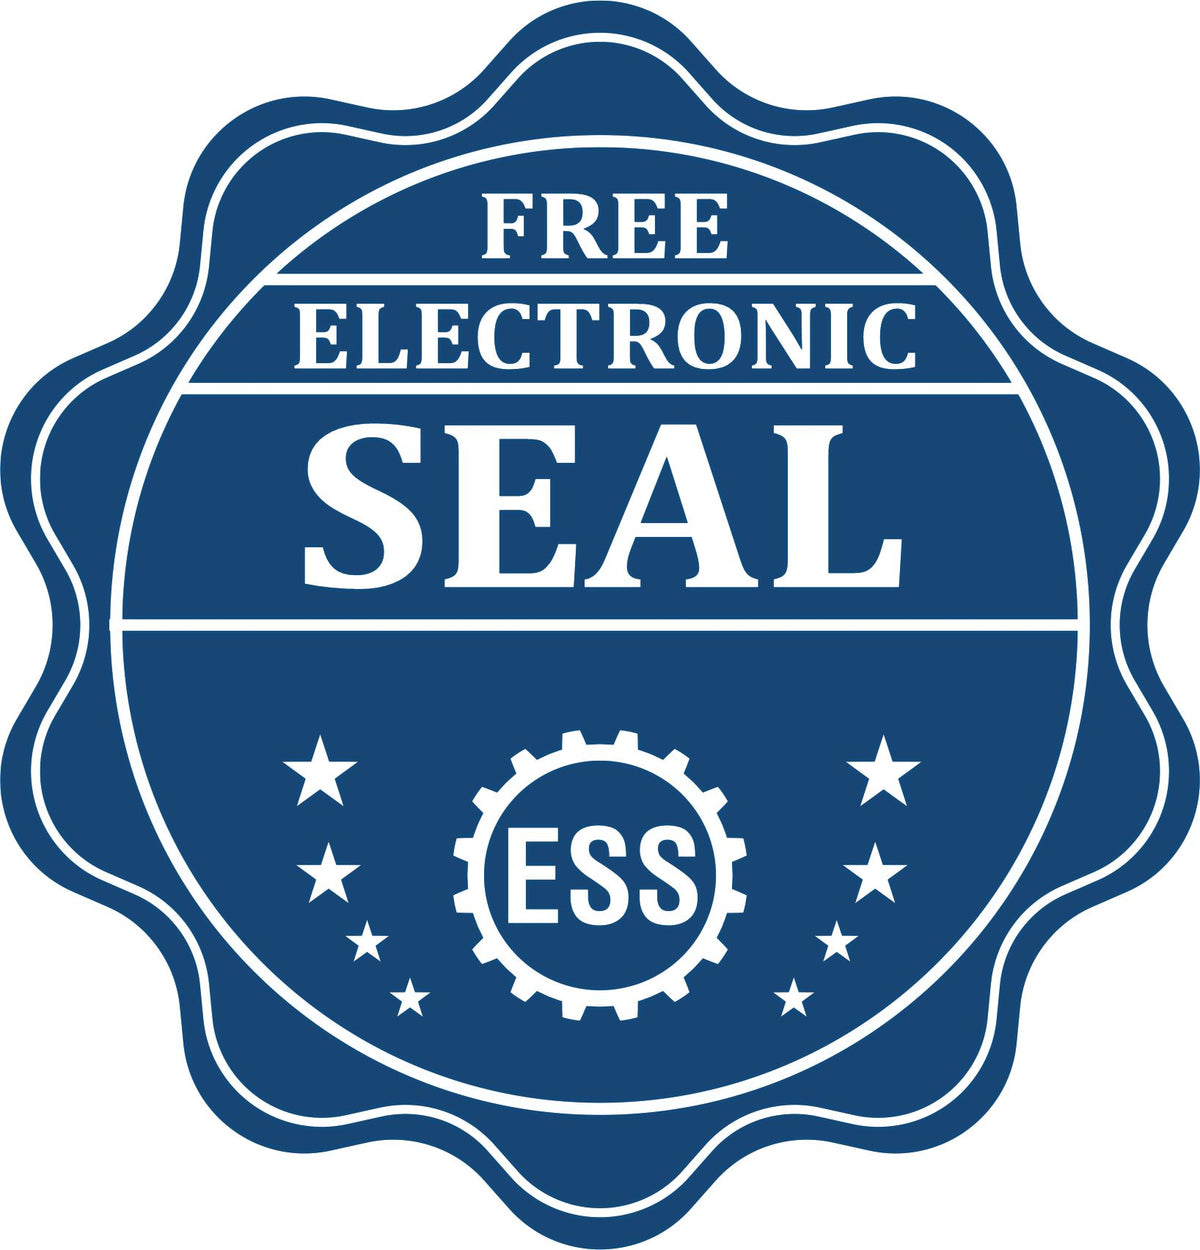 A badge showing a free electronic seal for the Handheld Montana Professional Geologist Embosser with stars and the ESS gear on the emblem.